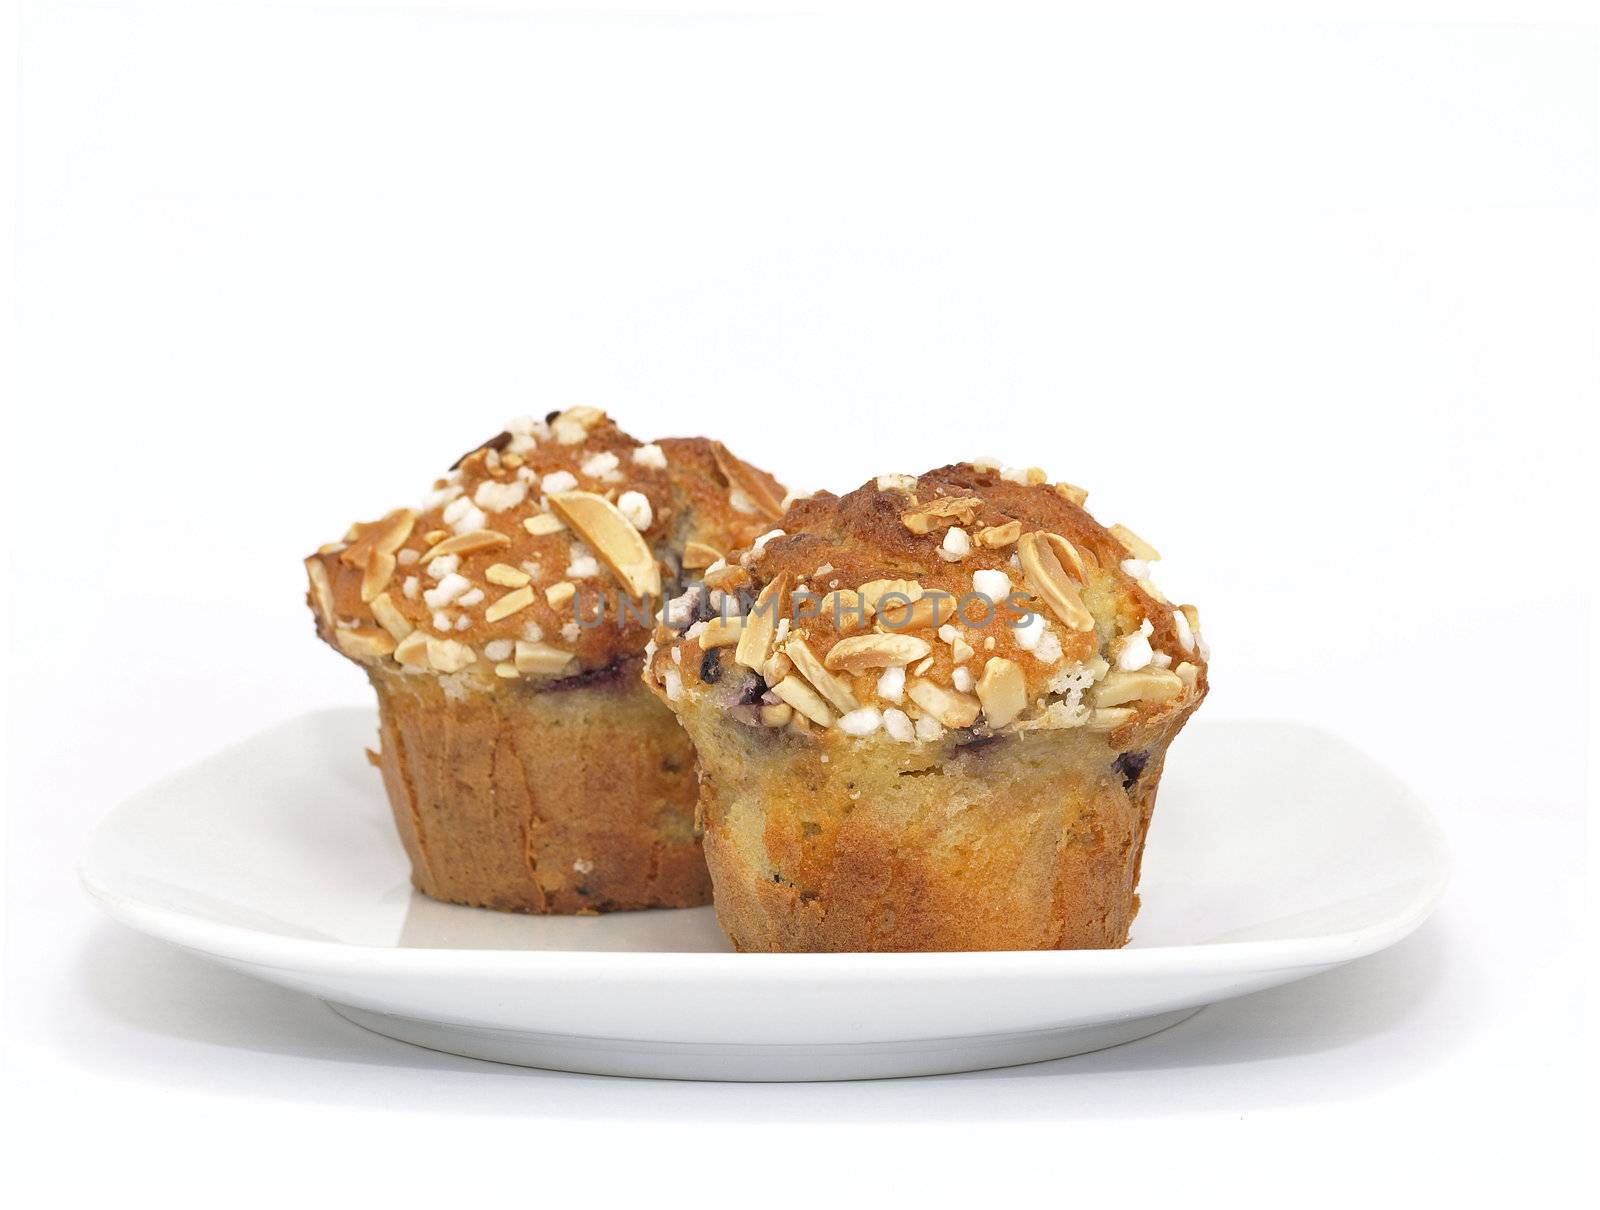 blueberry muffins with almond toppings on plate